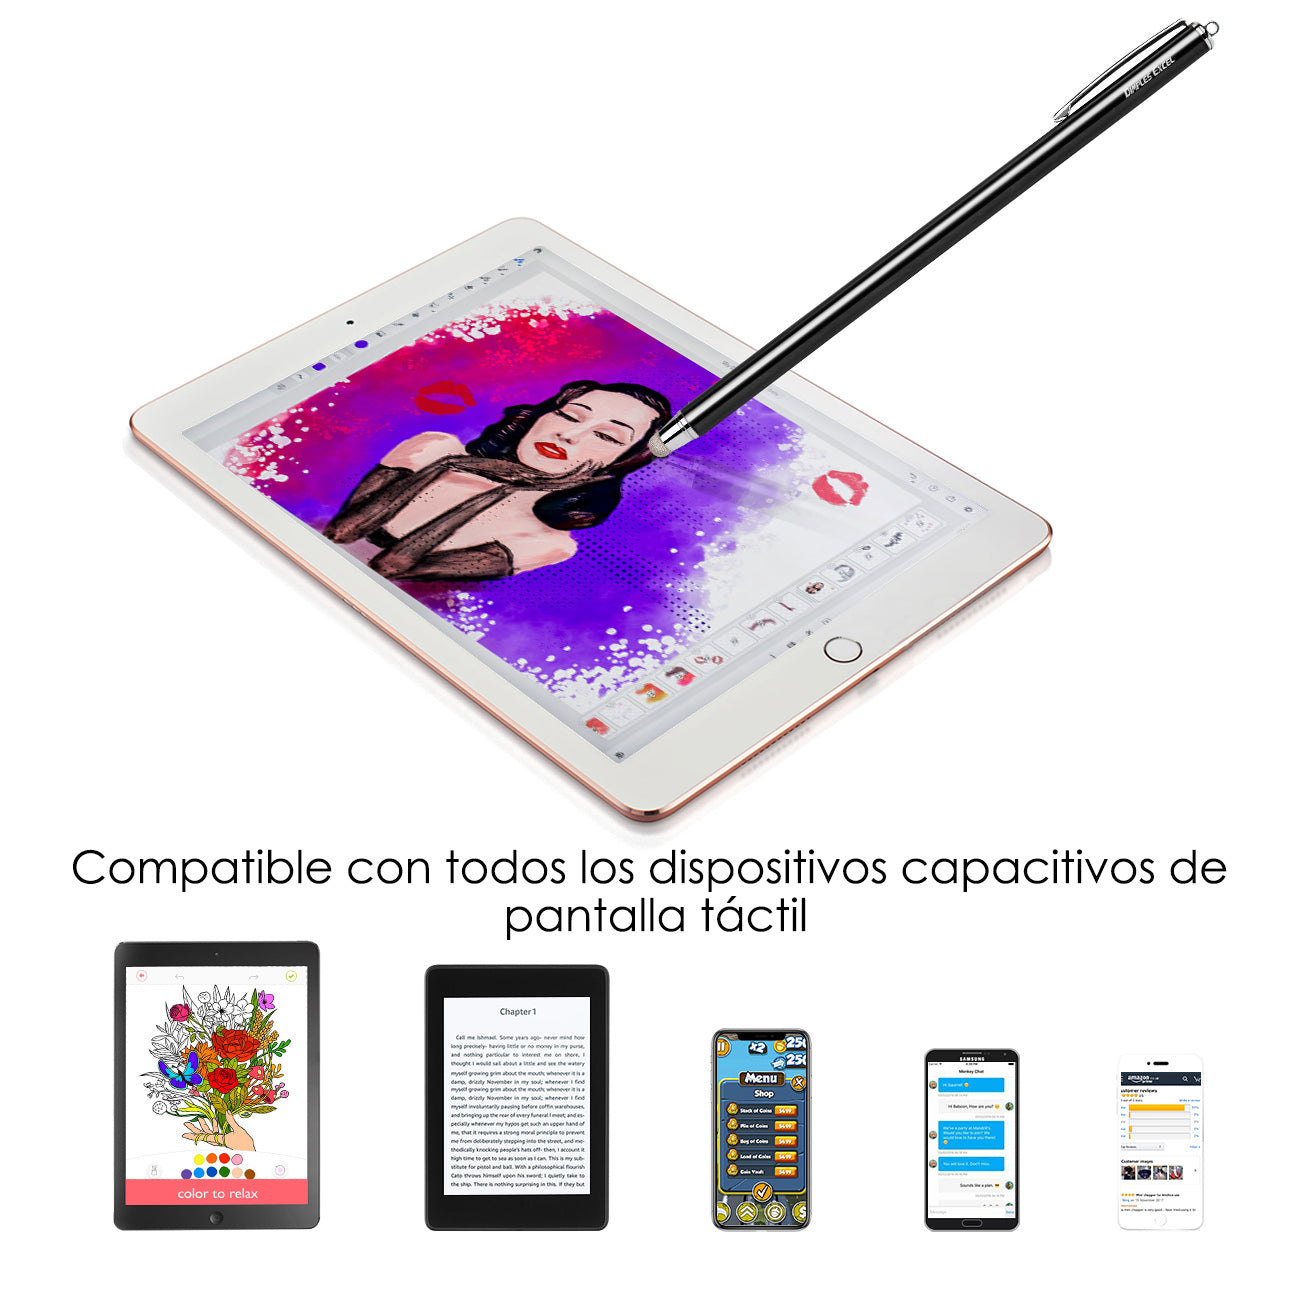 7.5" Long Stylus Digital Pens for Iphone Ipad Tablets Touch Screens